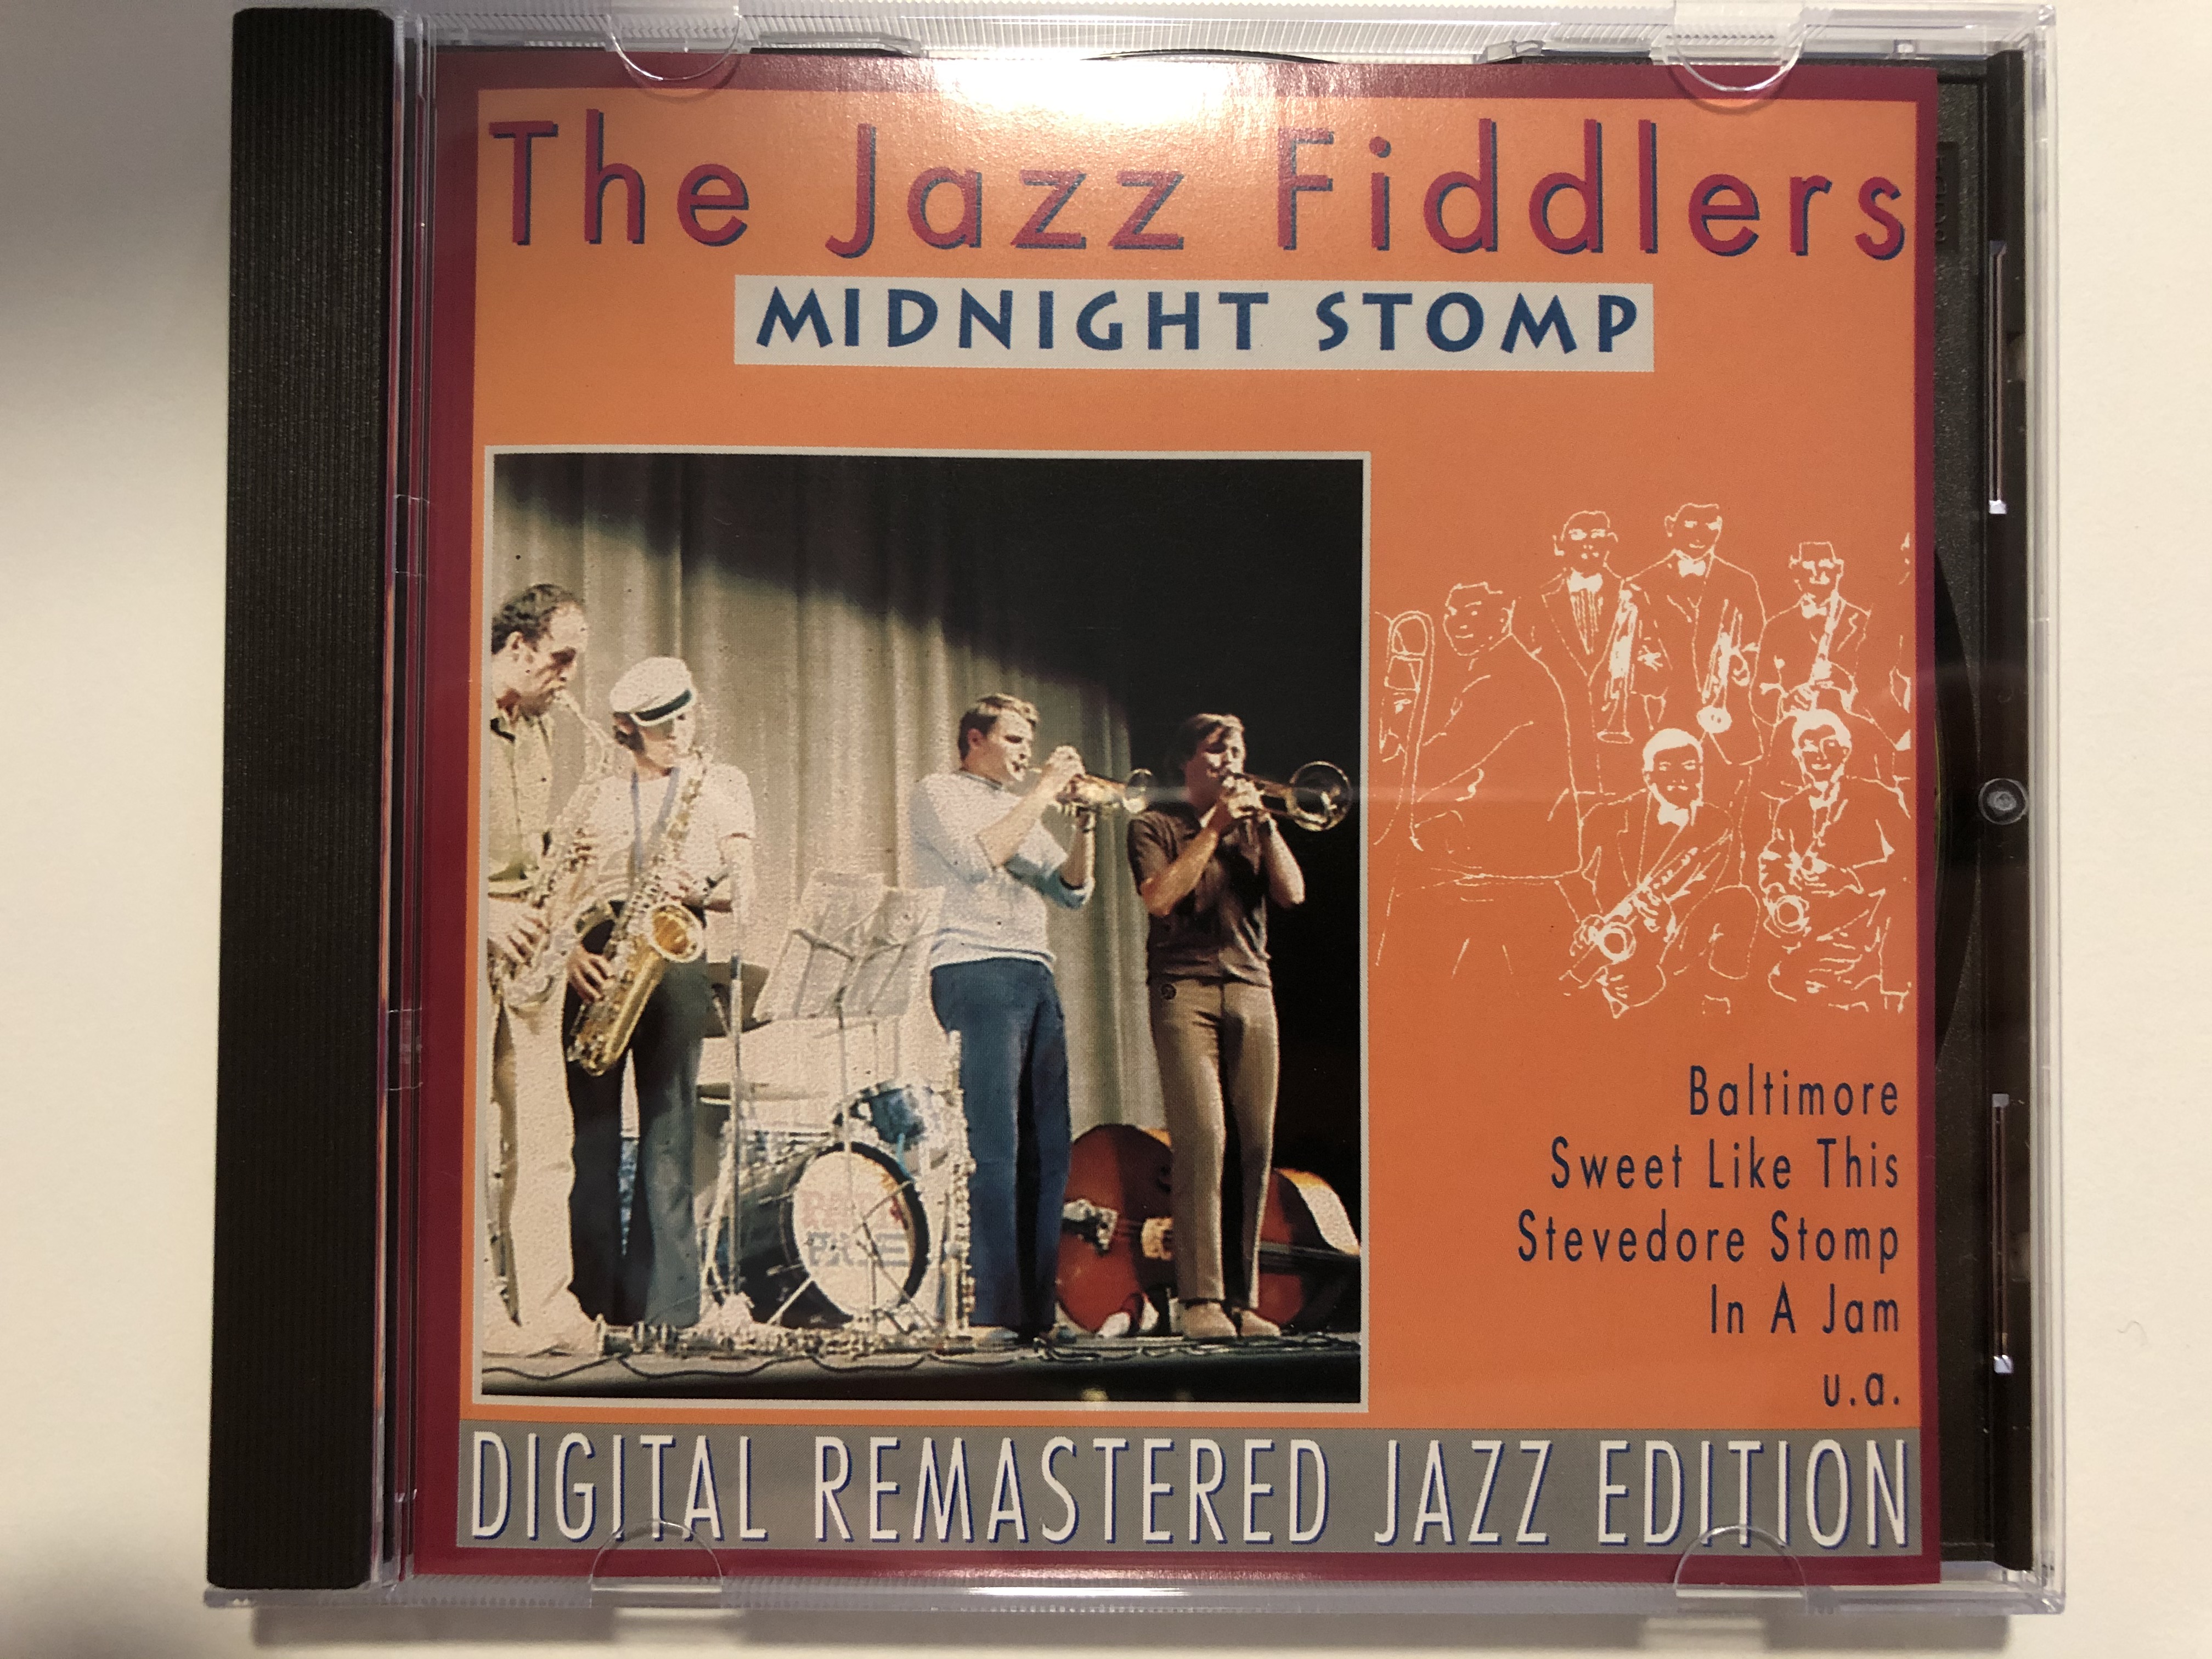 the-jazz-fiddlers-midnight-stomp-baltimore-sweet-like-this-stevedore-stomp-in-a-jam-u.a.-digital-remastered-jazz-edition-pastels-audio-cd-1995-cd-20-1-.jpg